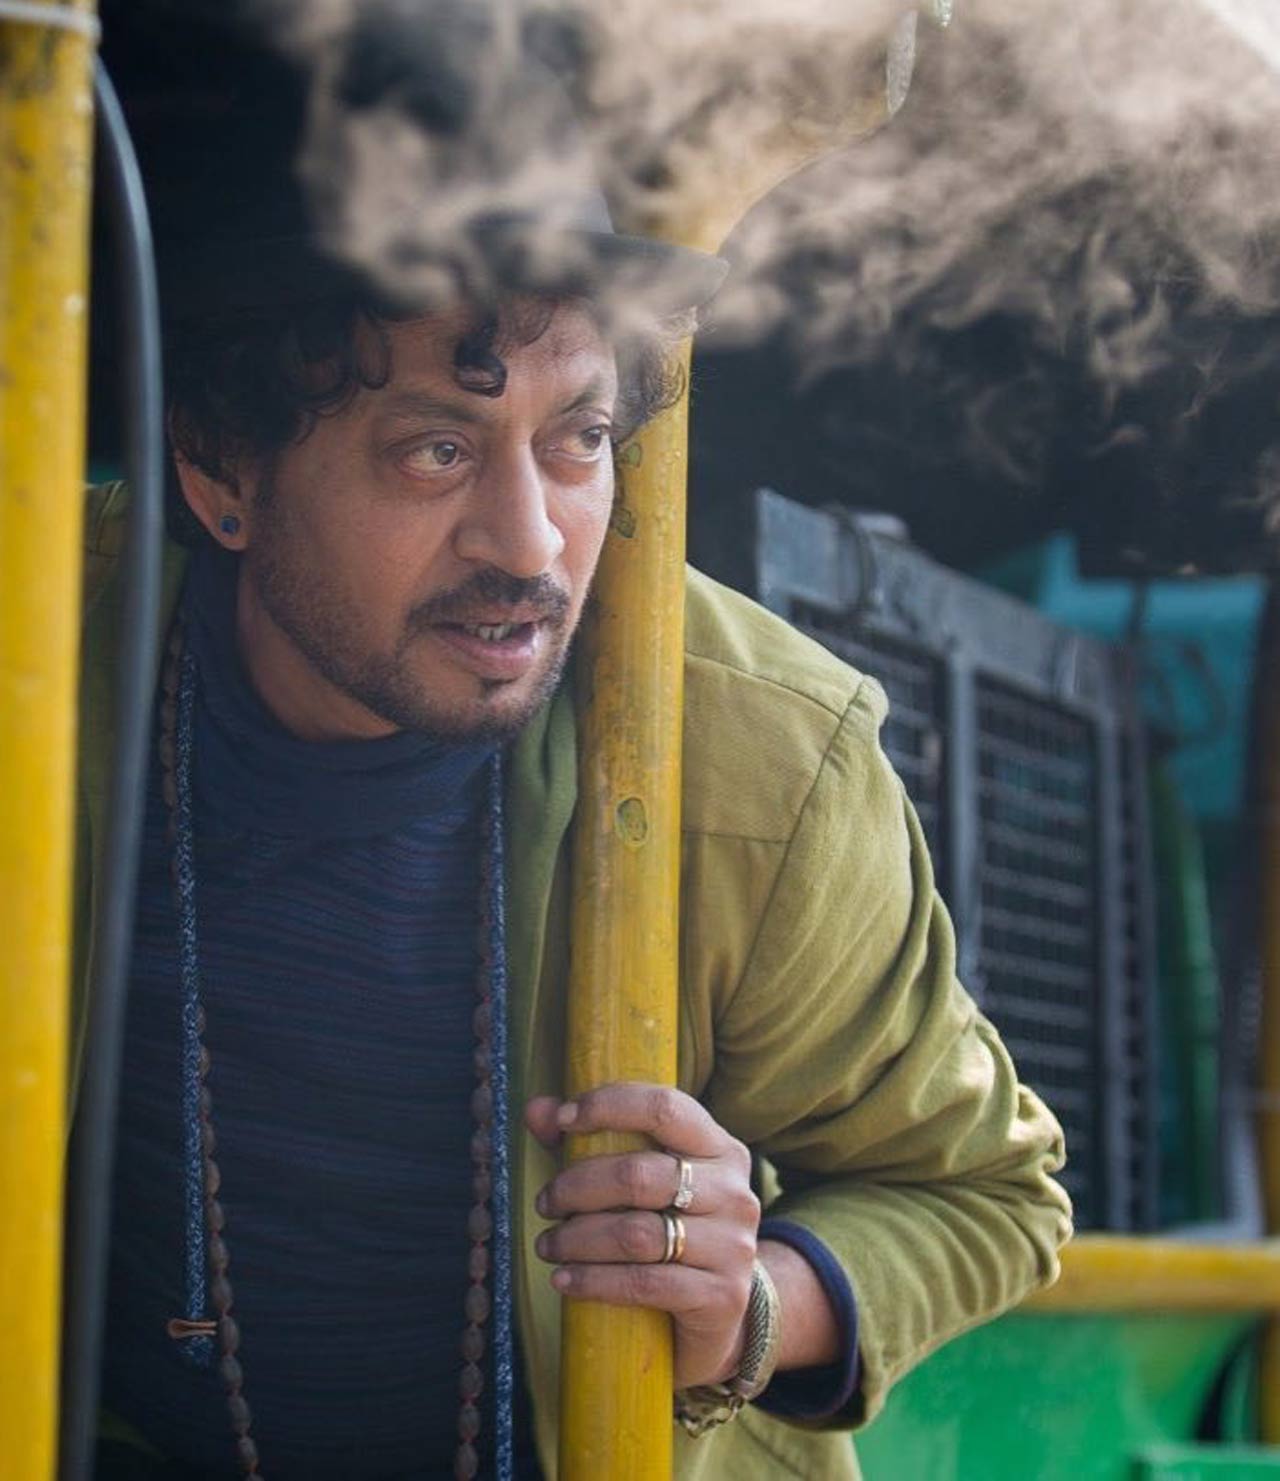 Irrfan Khan, a star who left us too soon but gave the globe an array of spectacular performances began his career with Salaam Bombay in 1988 and has been a part of various historic shows like Mahabharata, Chanakya, etc